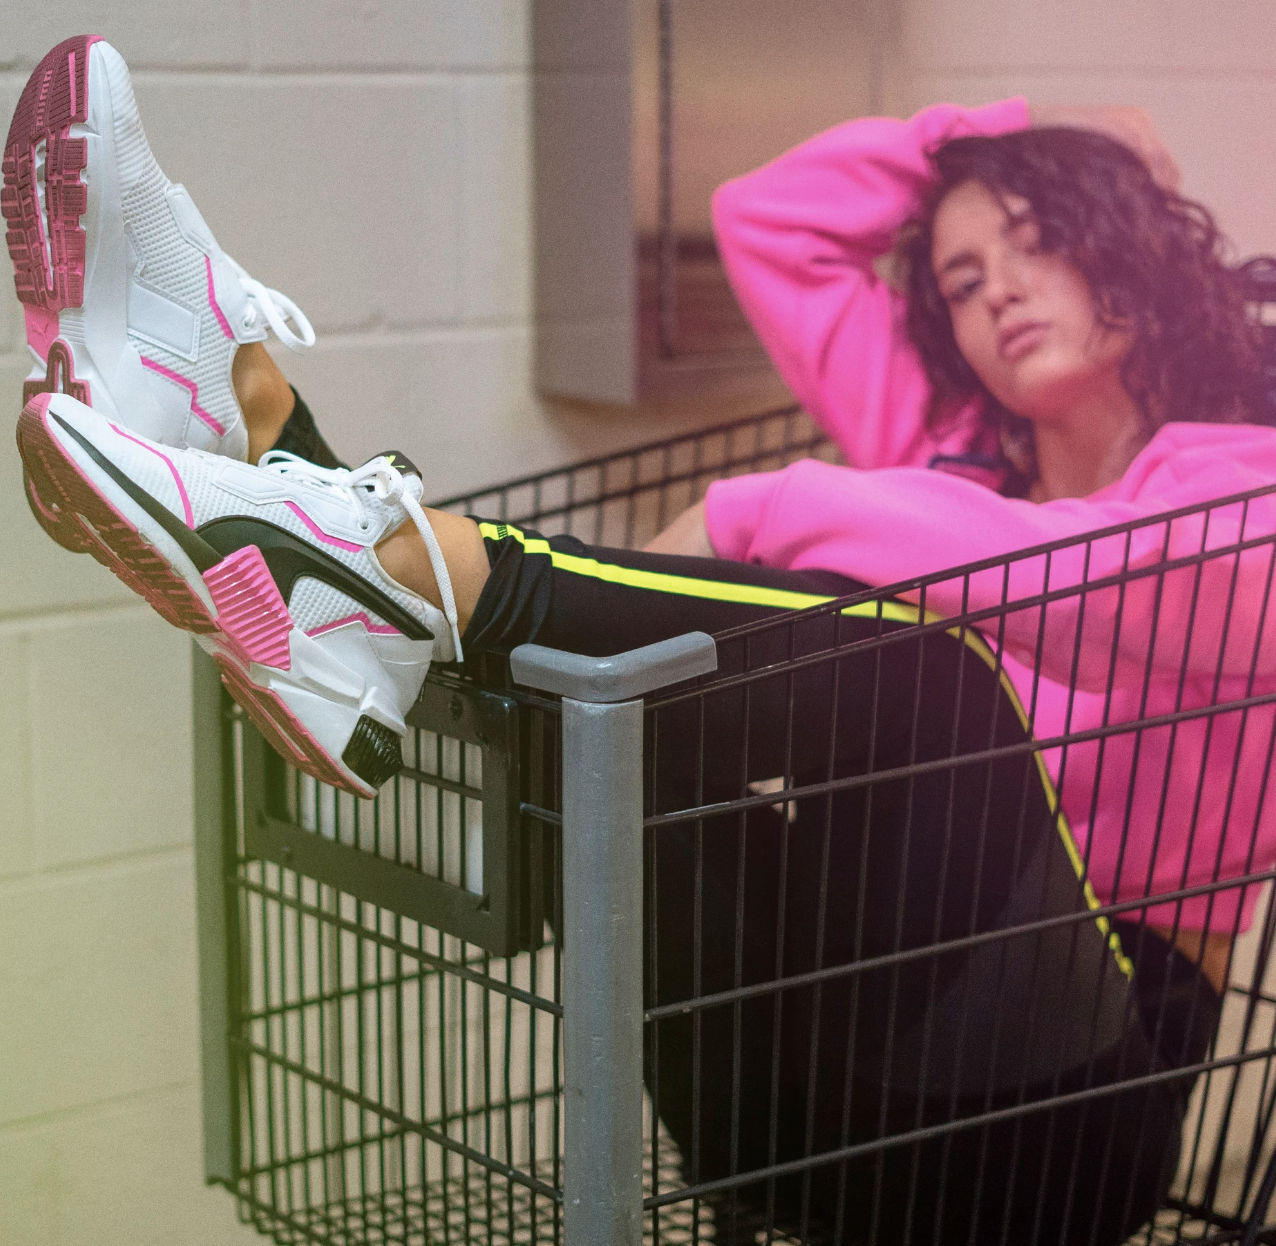 a model sitting in a shopping cart with their feet kicked up to show white, black, and hjot pink sneakers